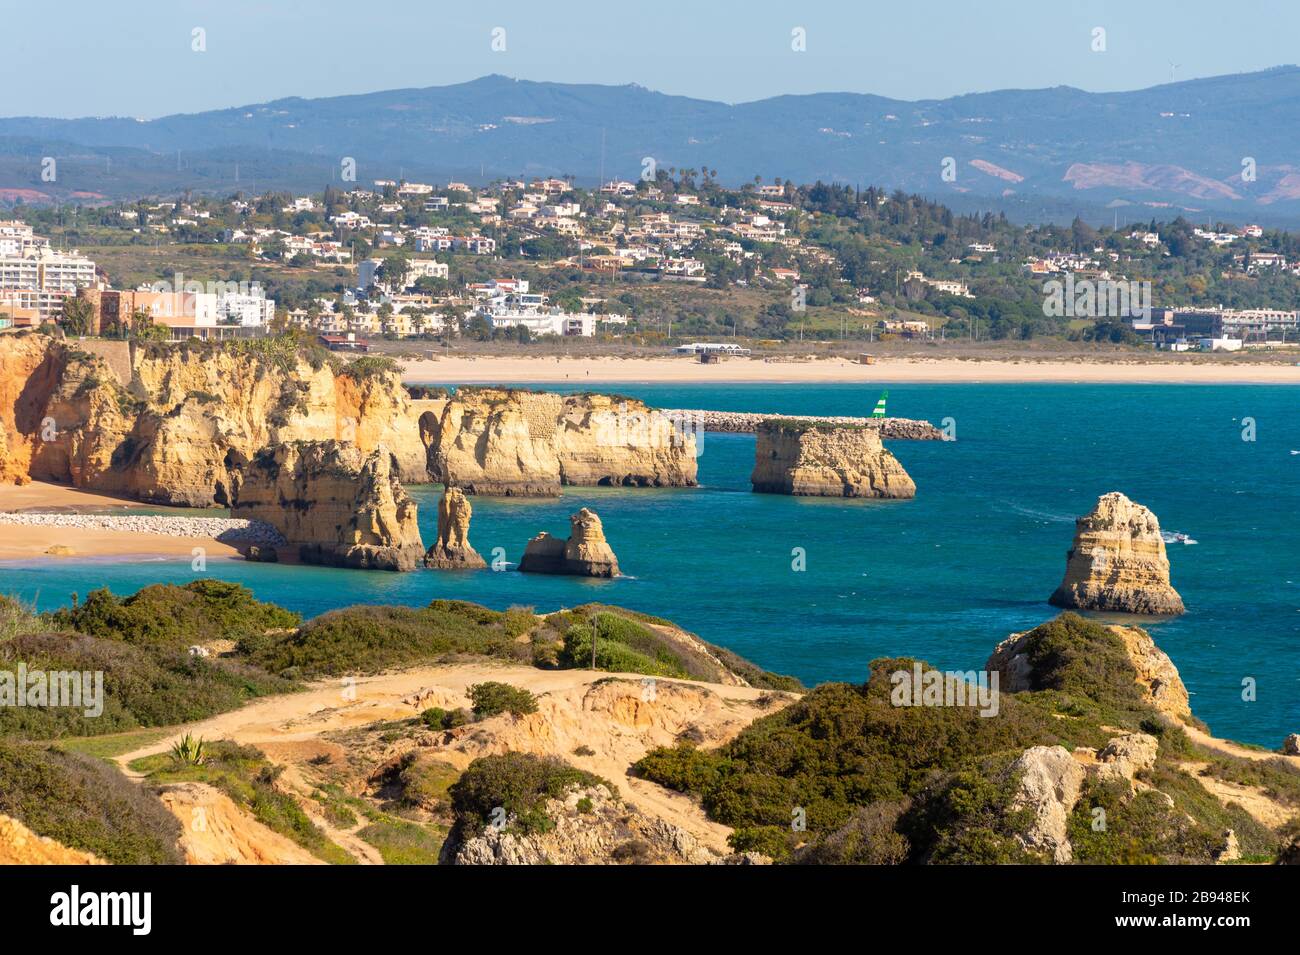 Lagos, Portugal - 7 March 2020: View of Lagos coastline in Portugal, Dona Ana Beach in the distance Stock Photo